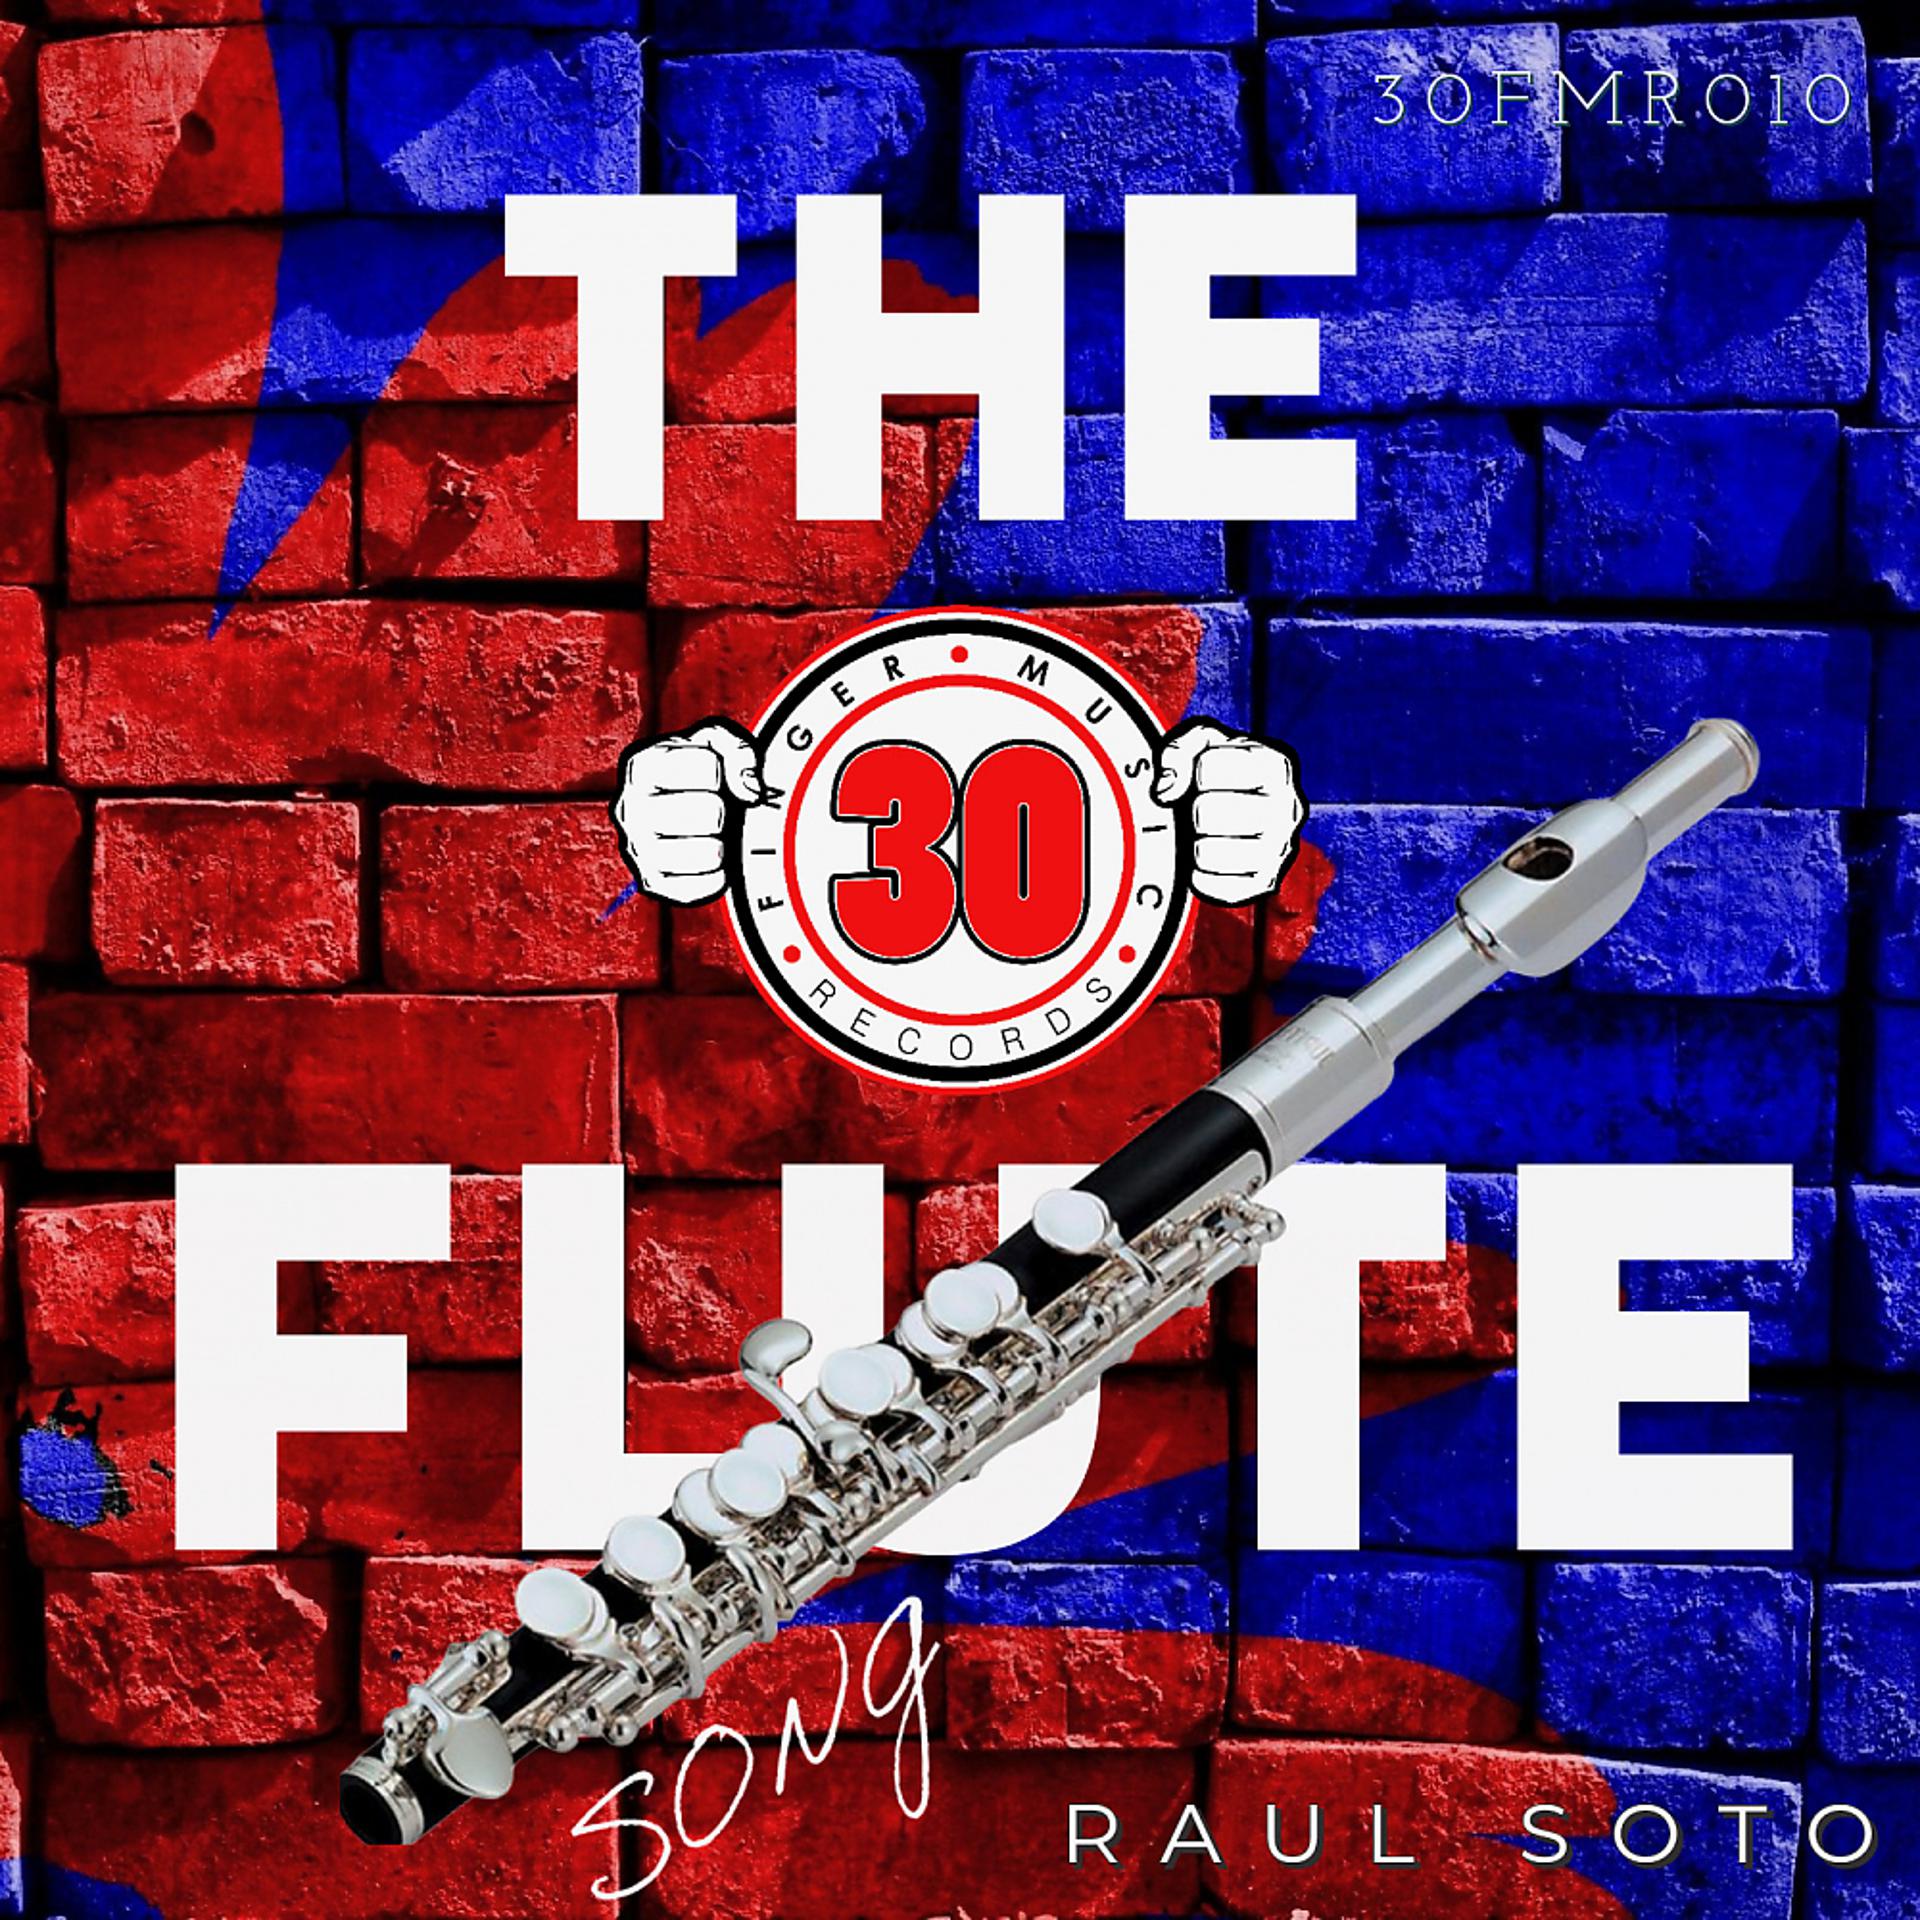 Постер альбома The Flute Song